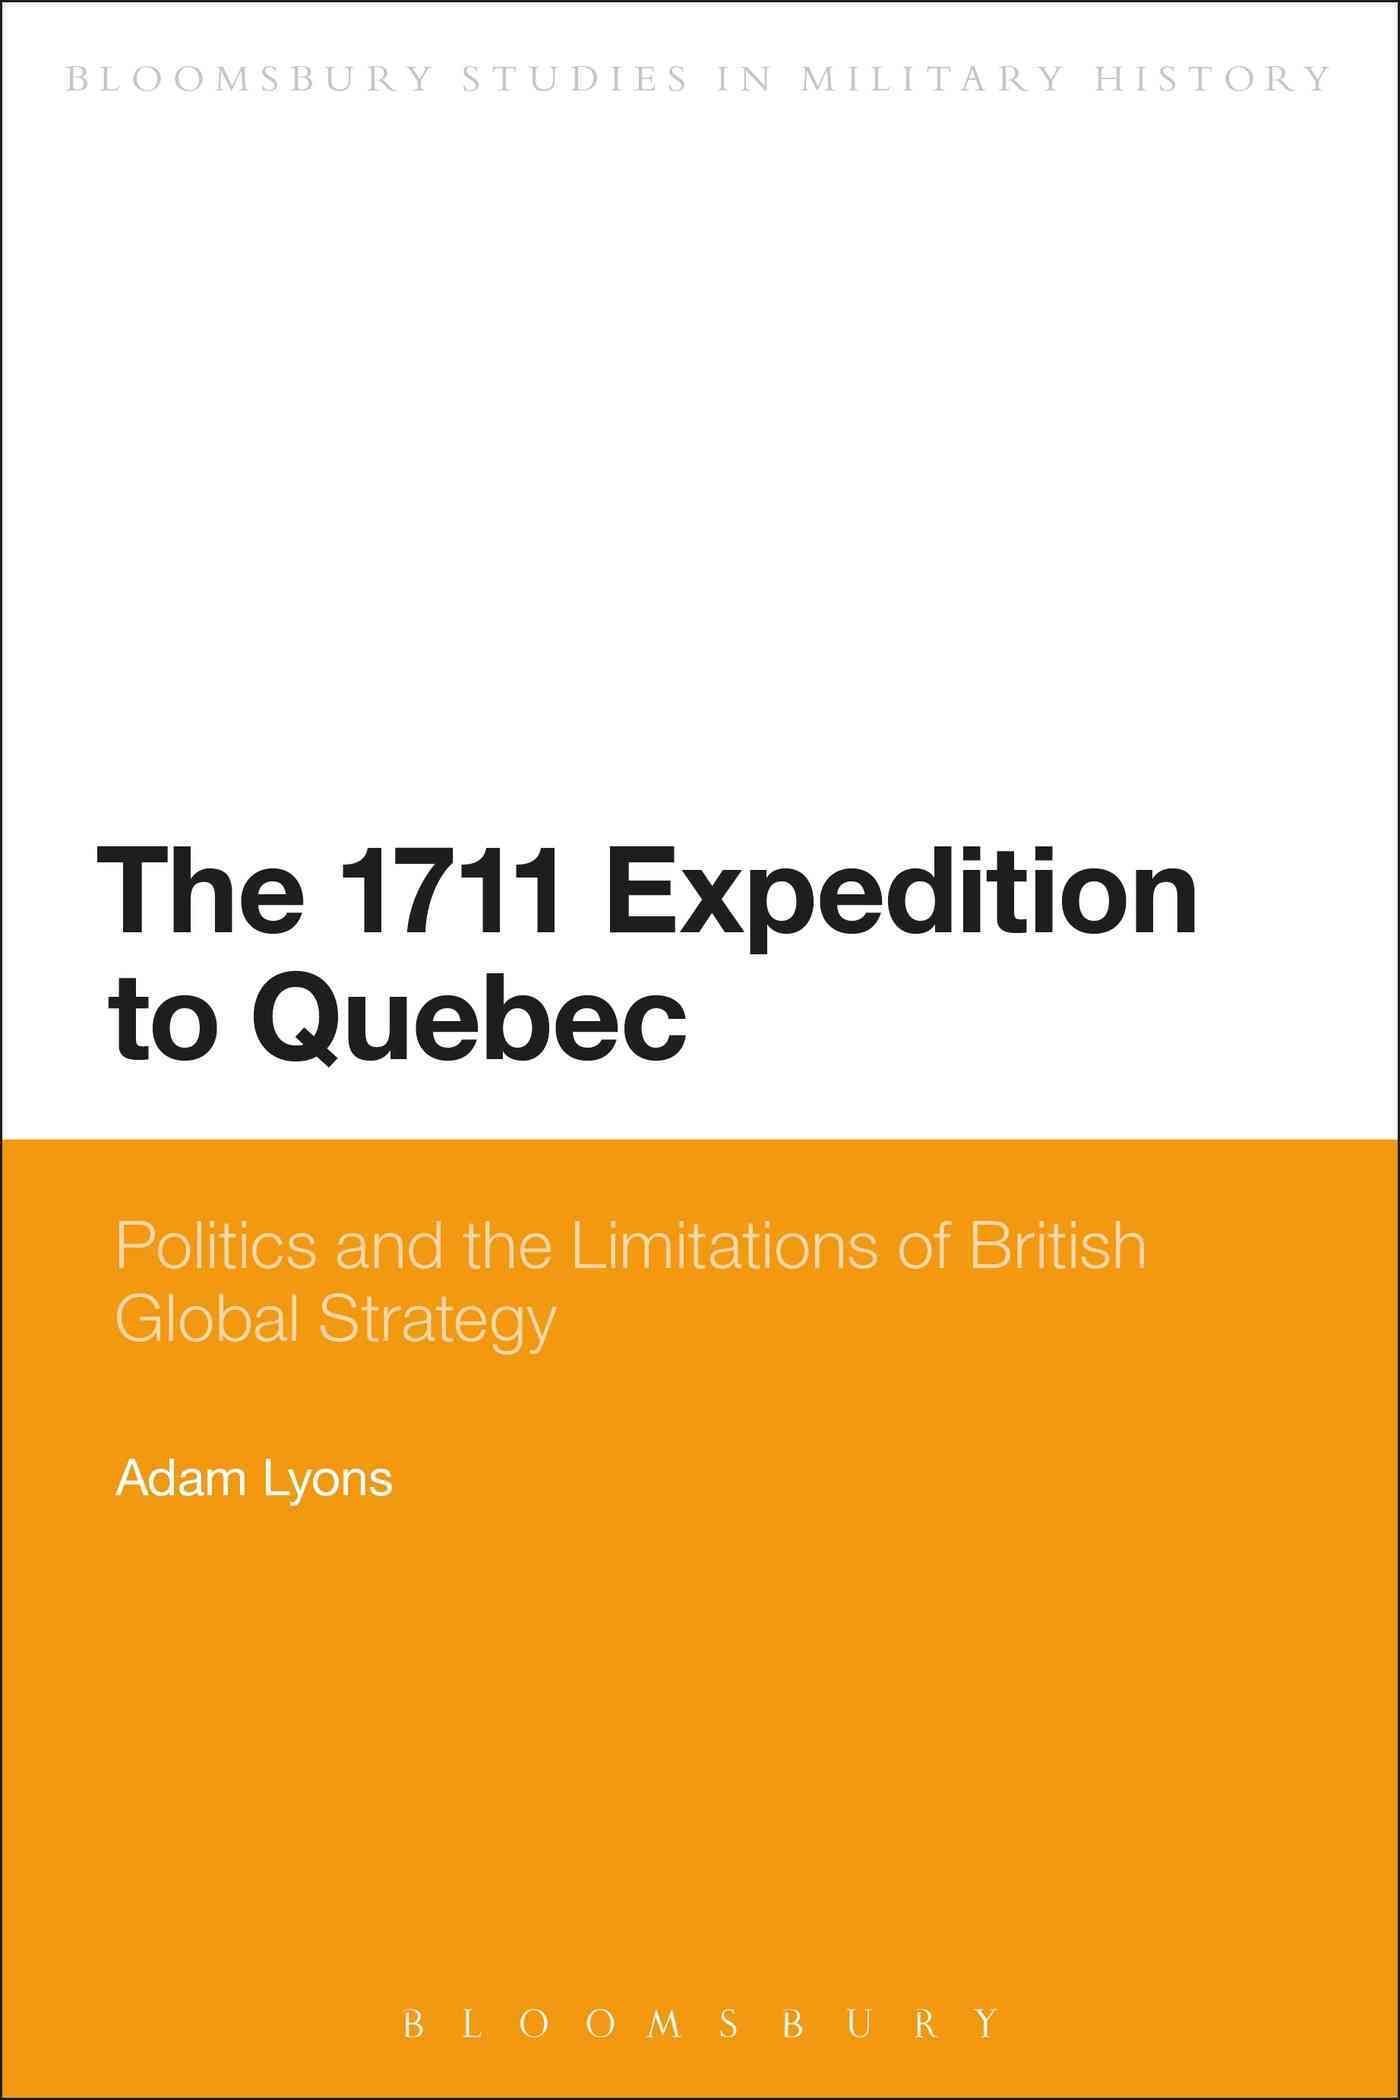 The 1711 Expedition to Quebec